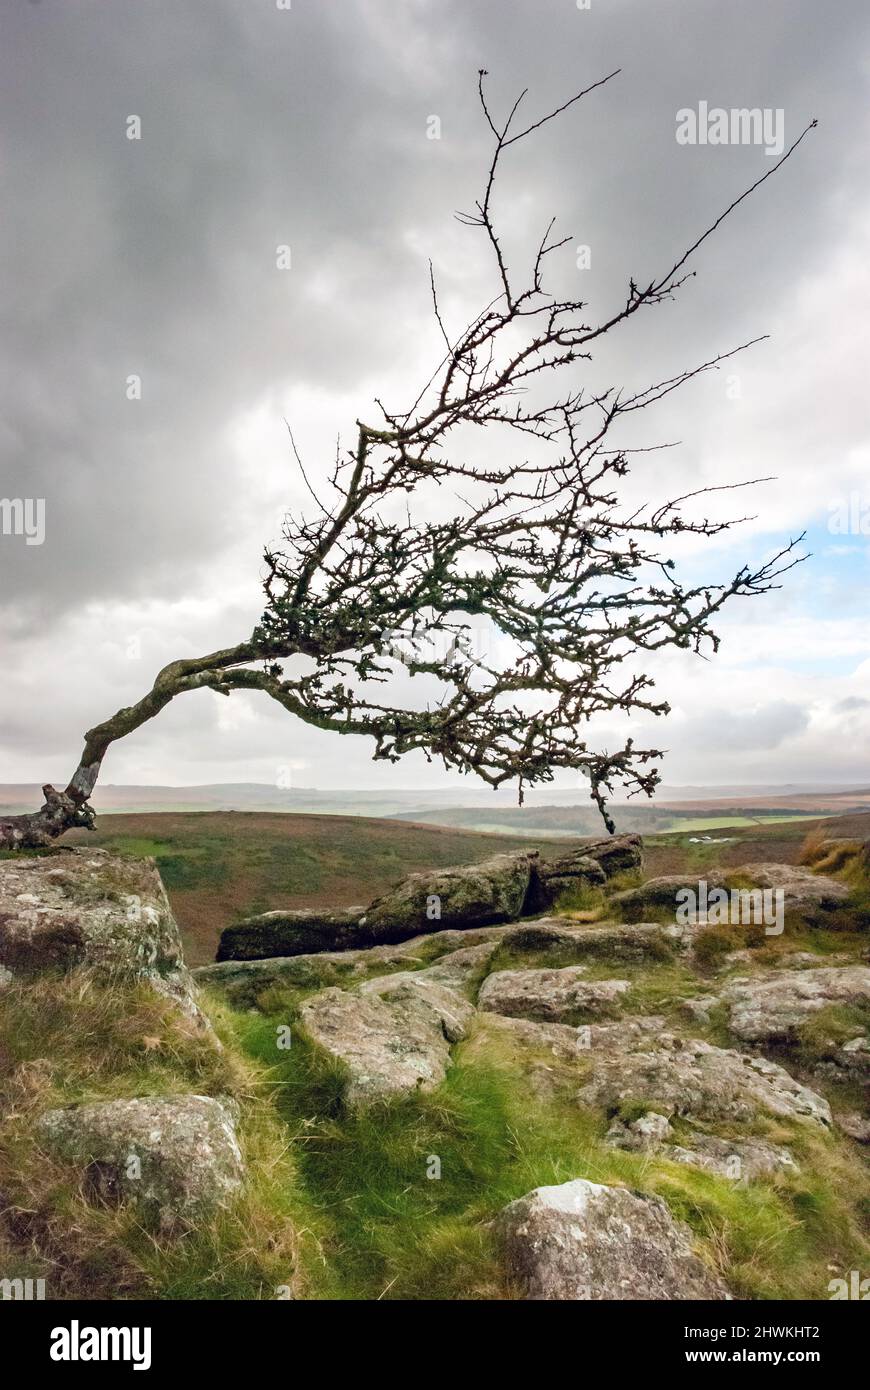 UK, England, Devonshire, Dartmoor. An old Hawthorne tree bent by the strong winds on Sharp Tor. Stock Photo